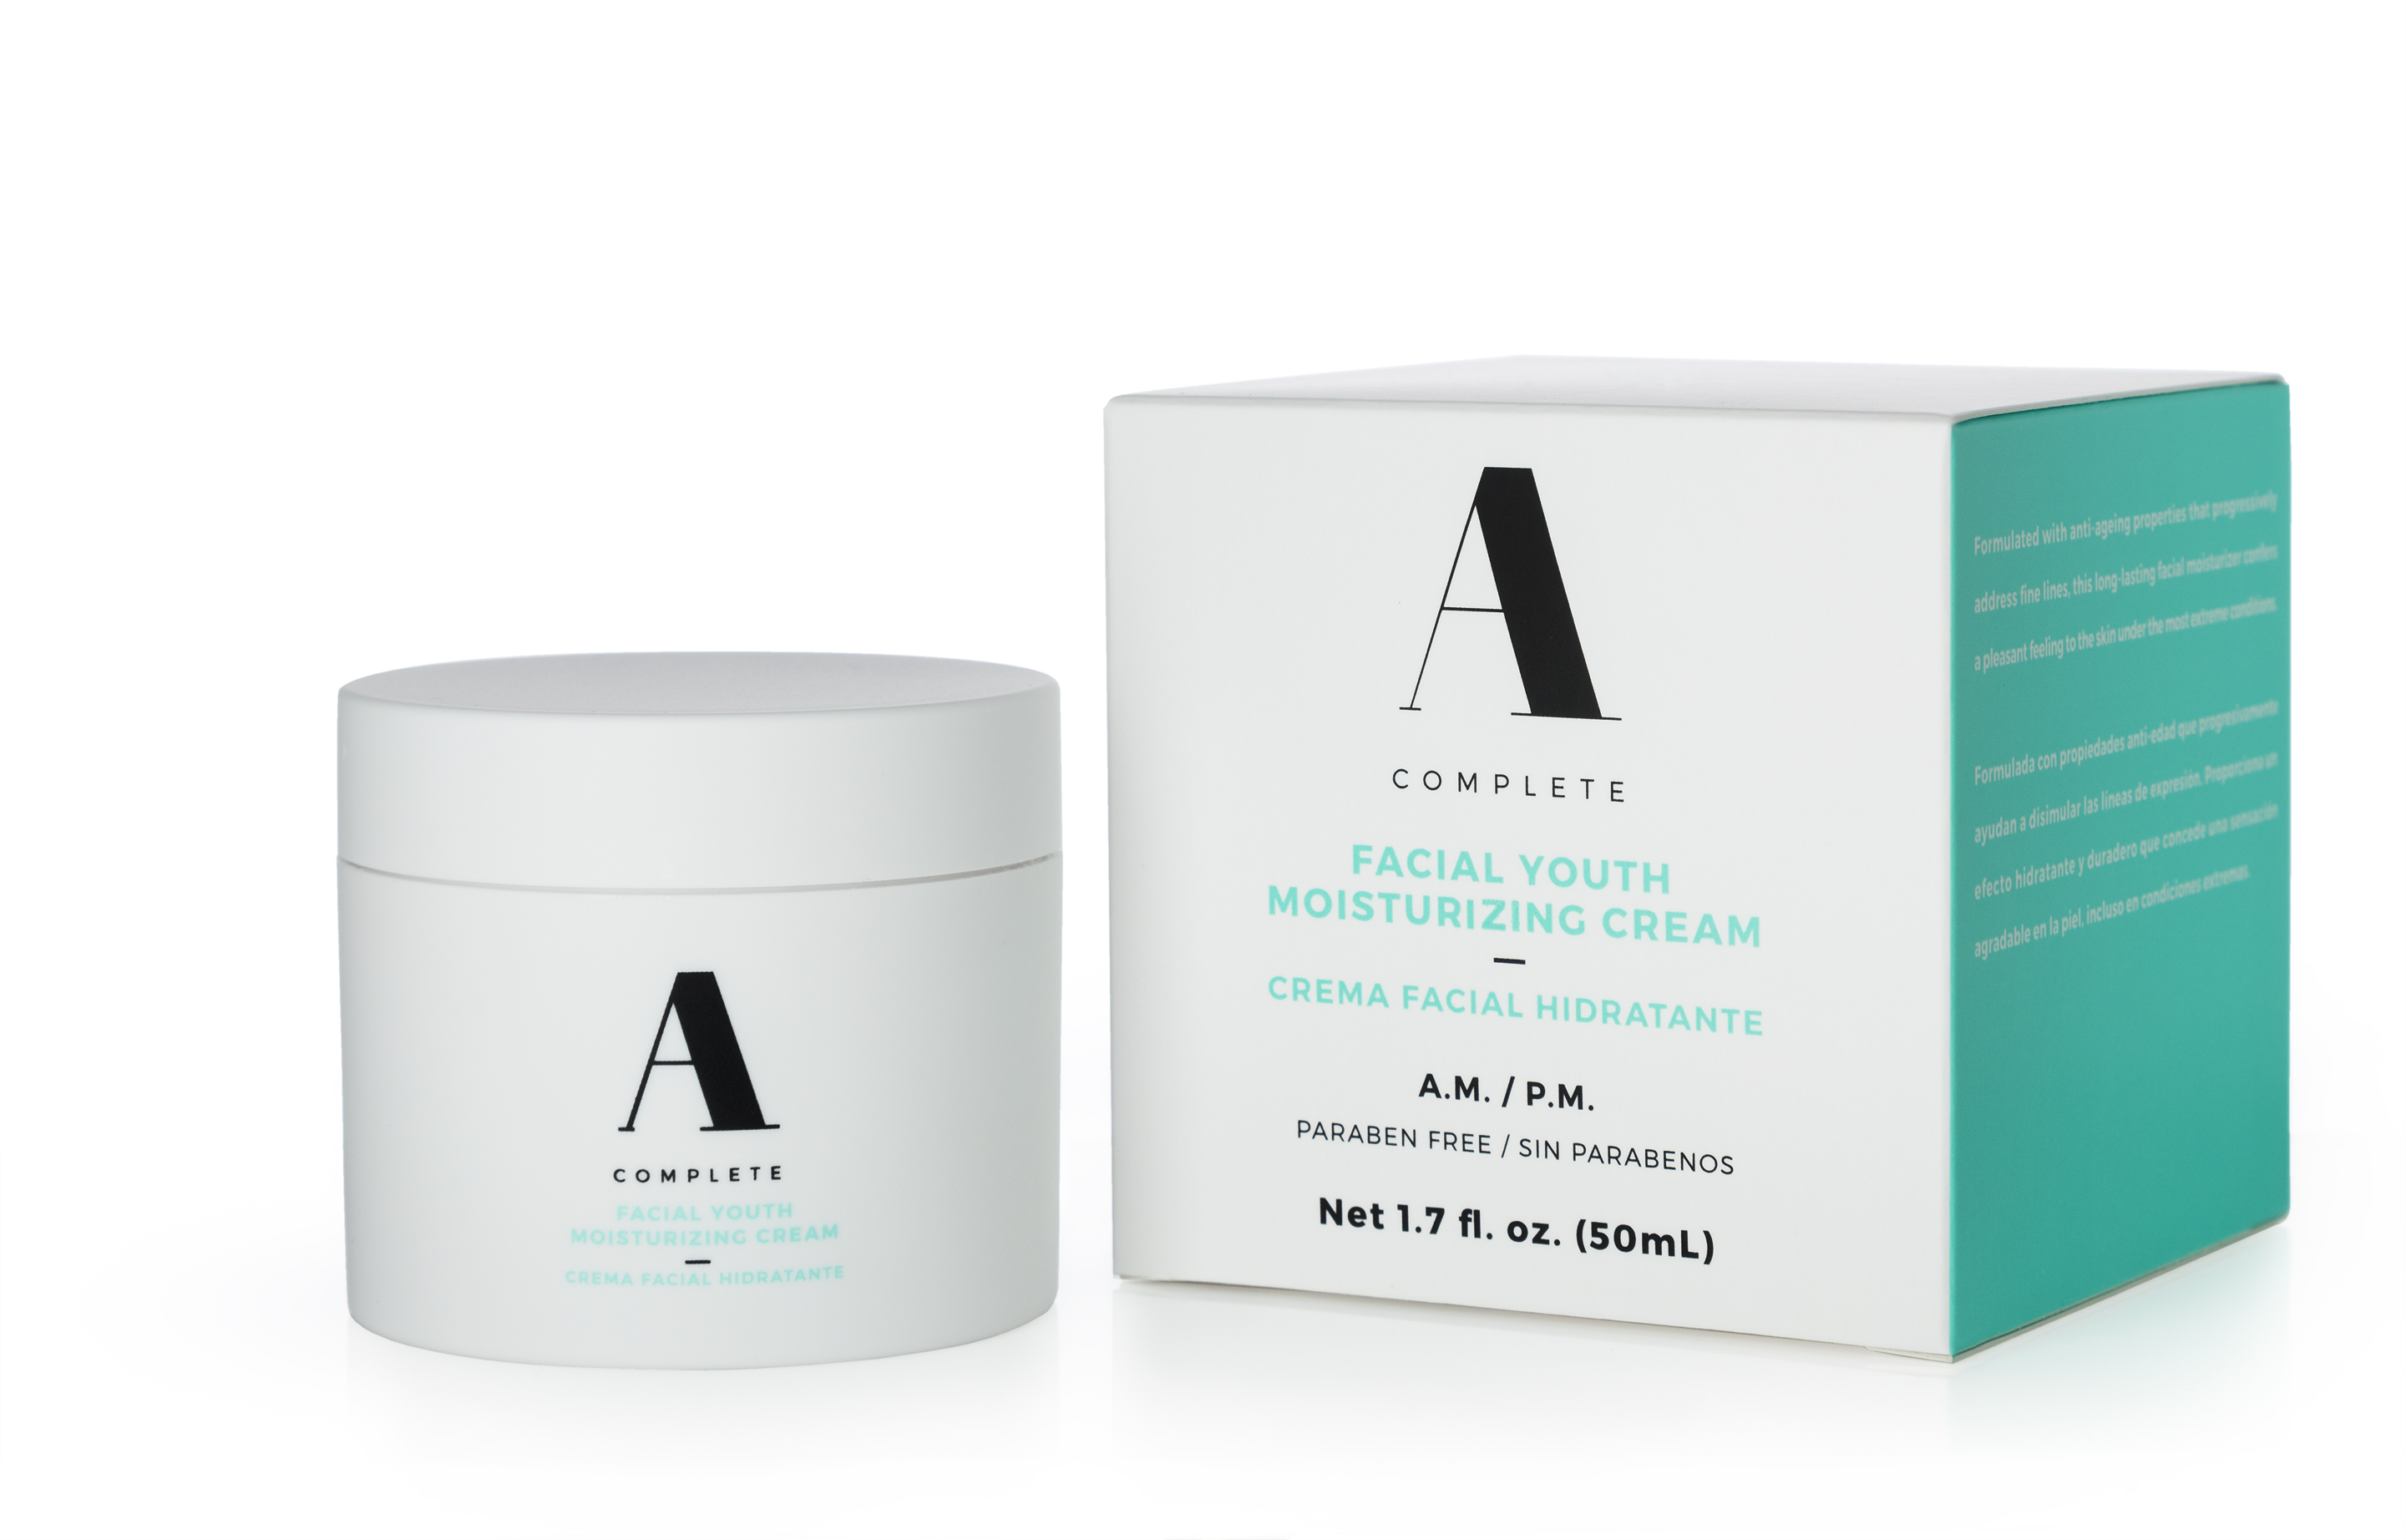 A Complete Facial Youth Moisturizing Cream